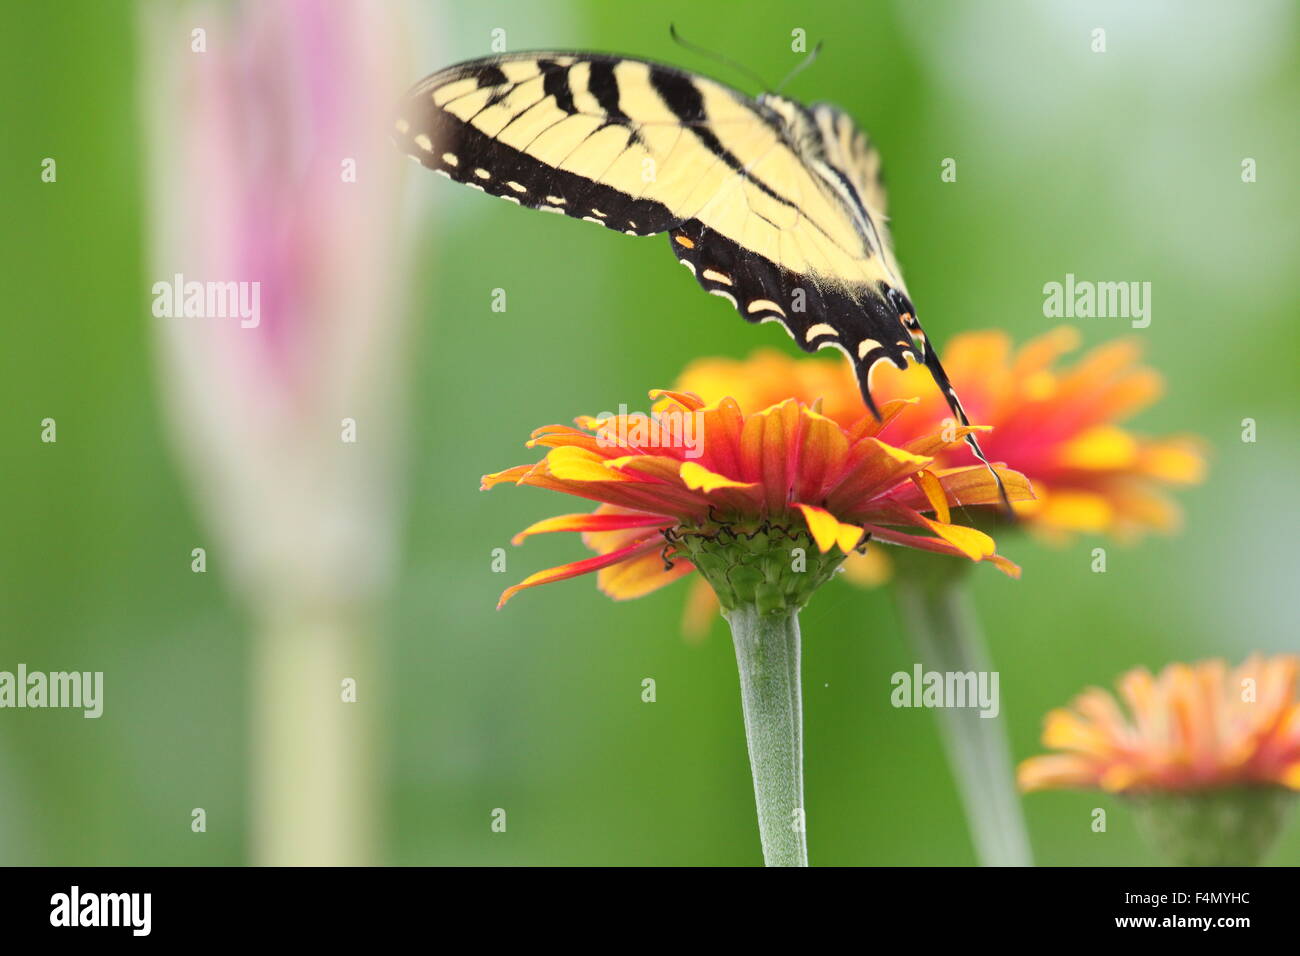 Tiger swallowtail butterfly survolant le zinnia. Banque D'Images